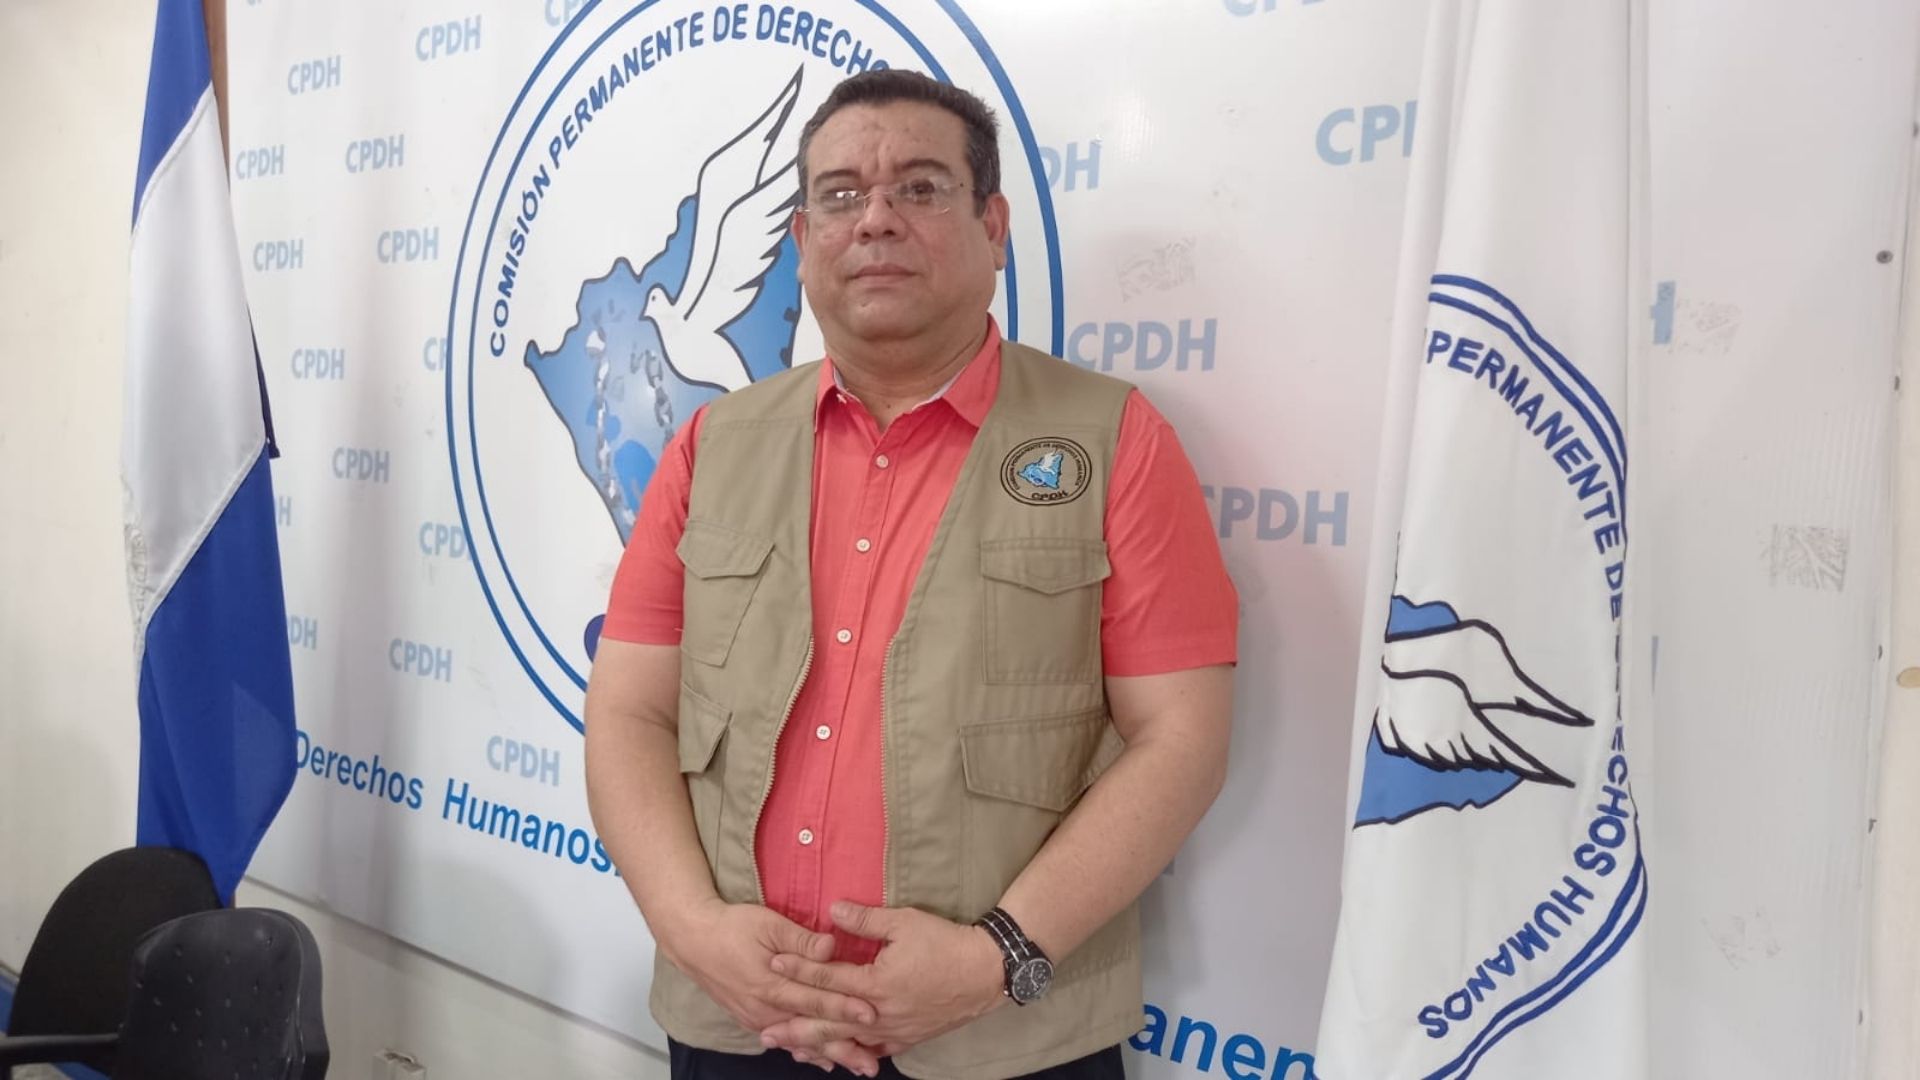 Secretary of the CPDH urges the United States and Canada to exert pressure so that "peace can return" to Nicaragua